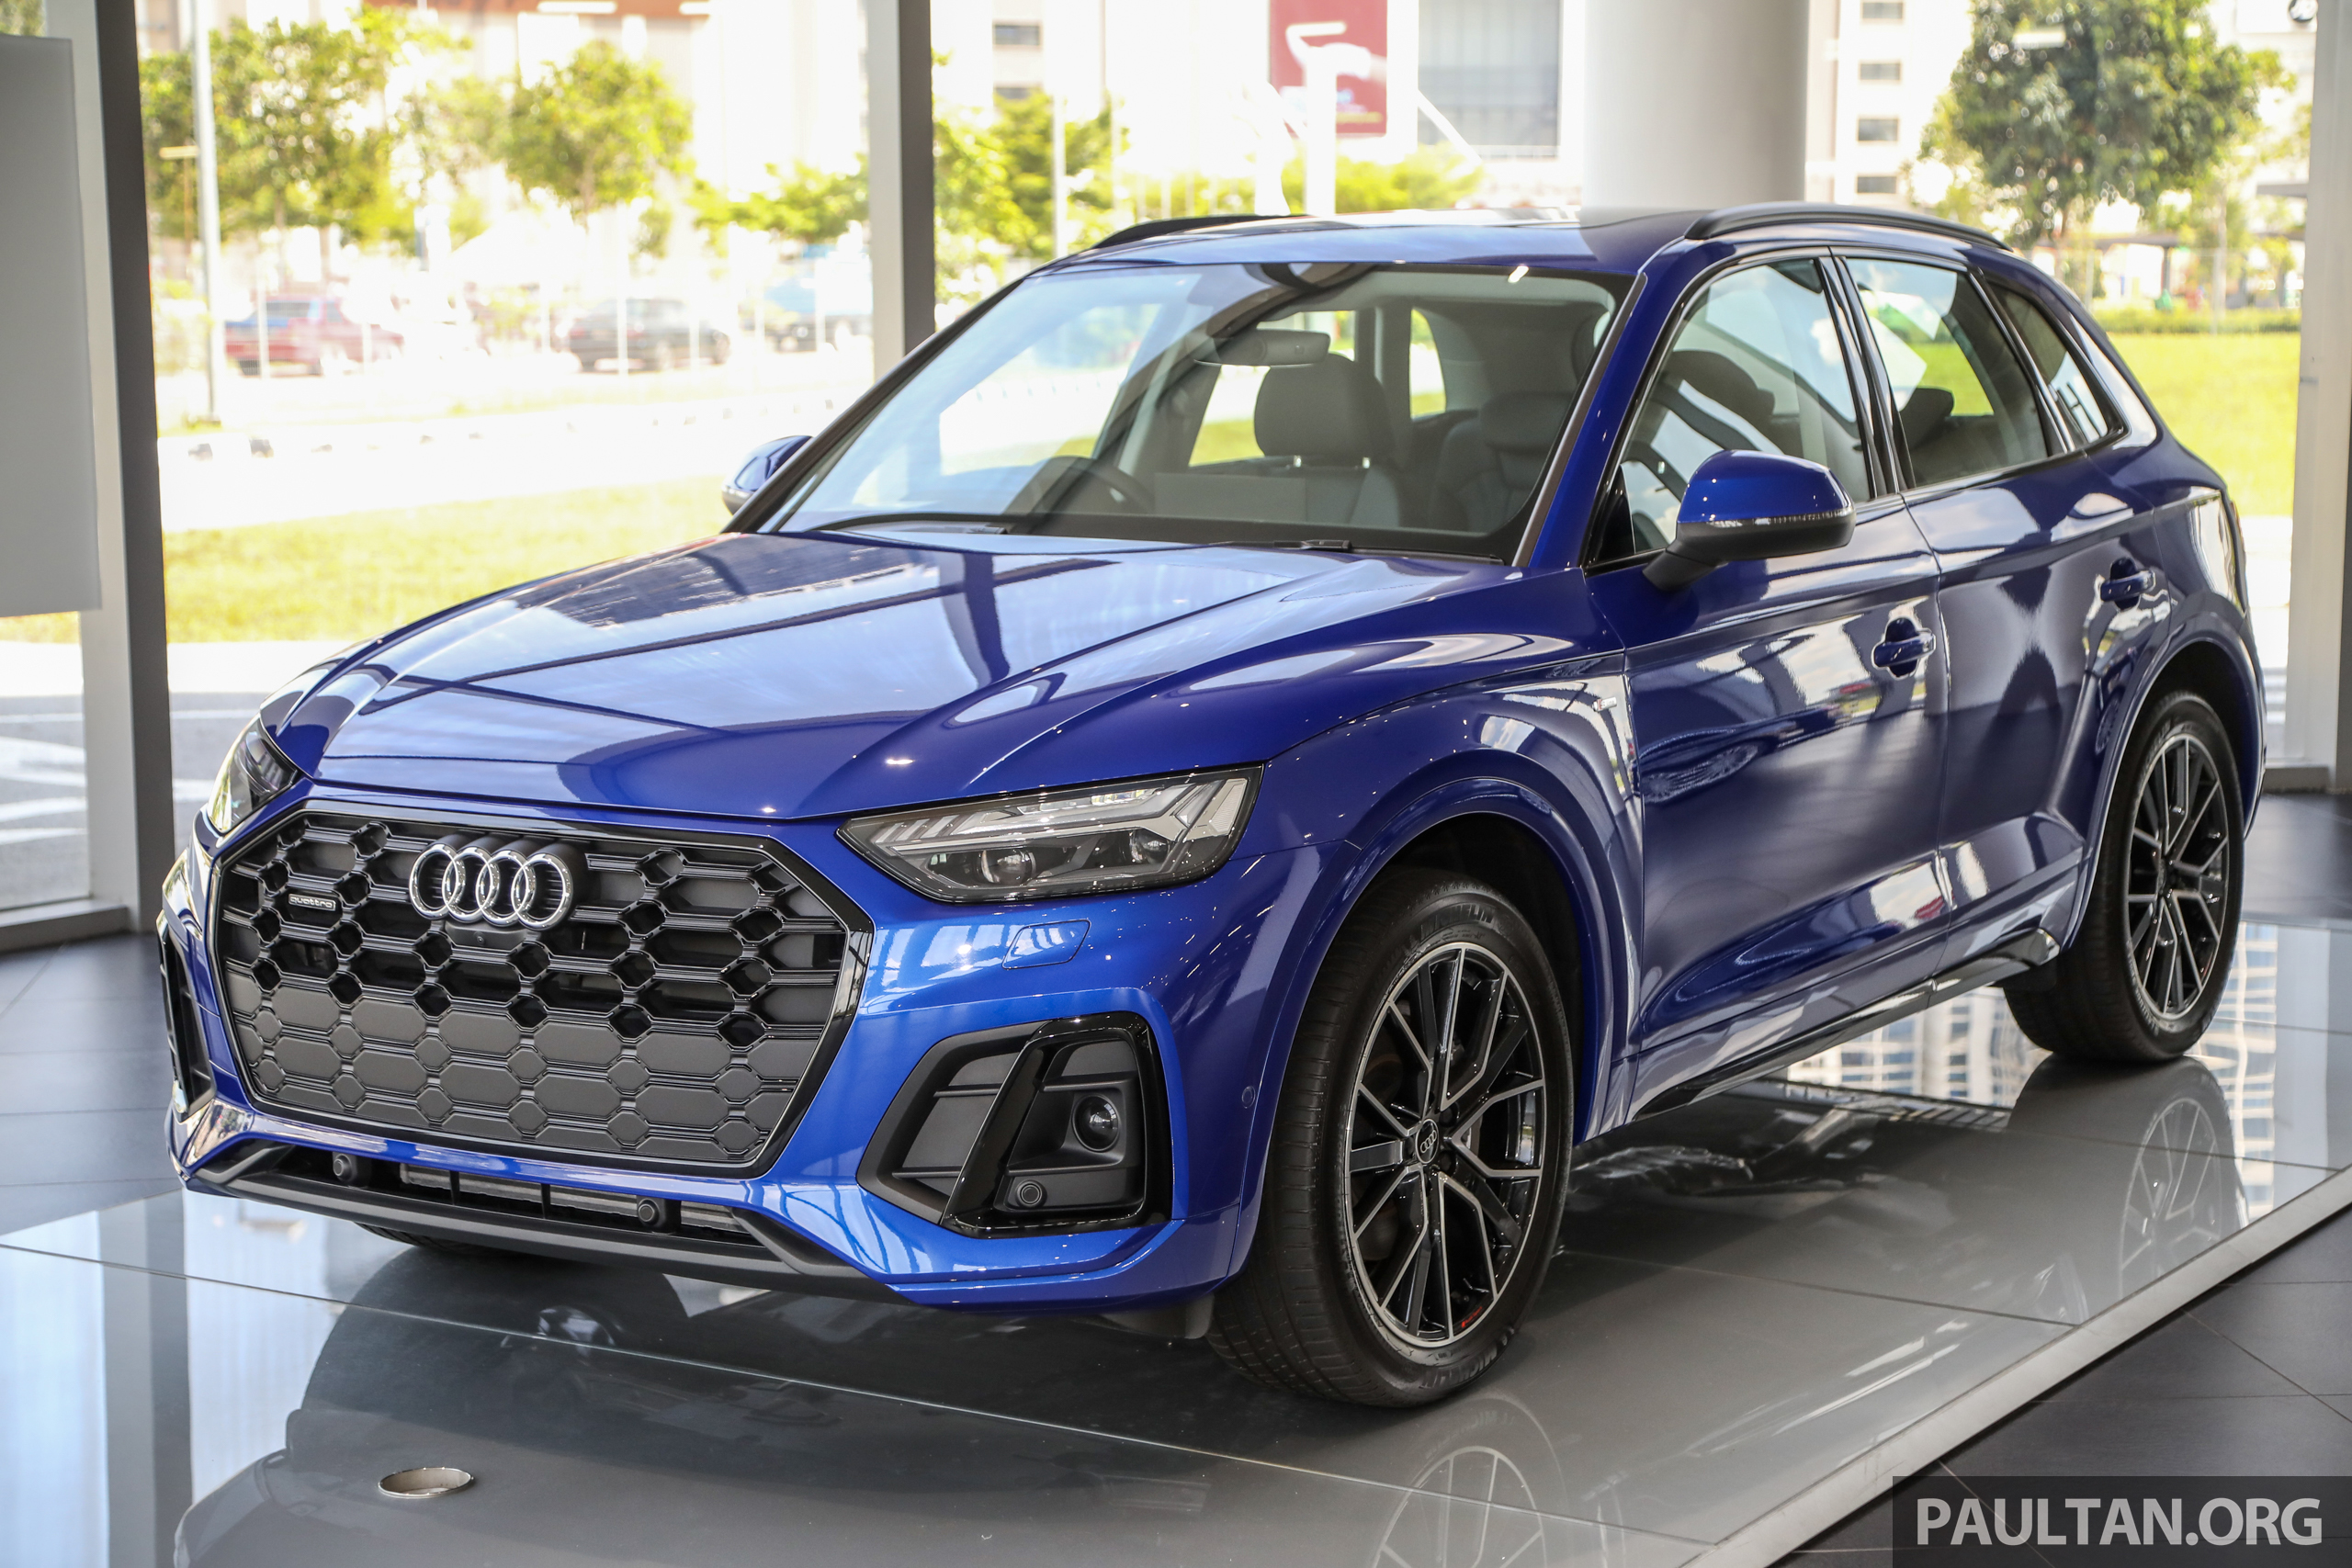 Facelift version of 5-seater SUV Audi Q5 is here, priced at Rs